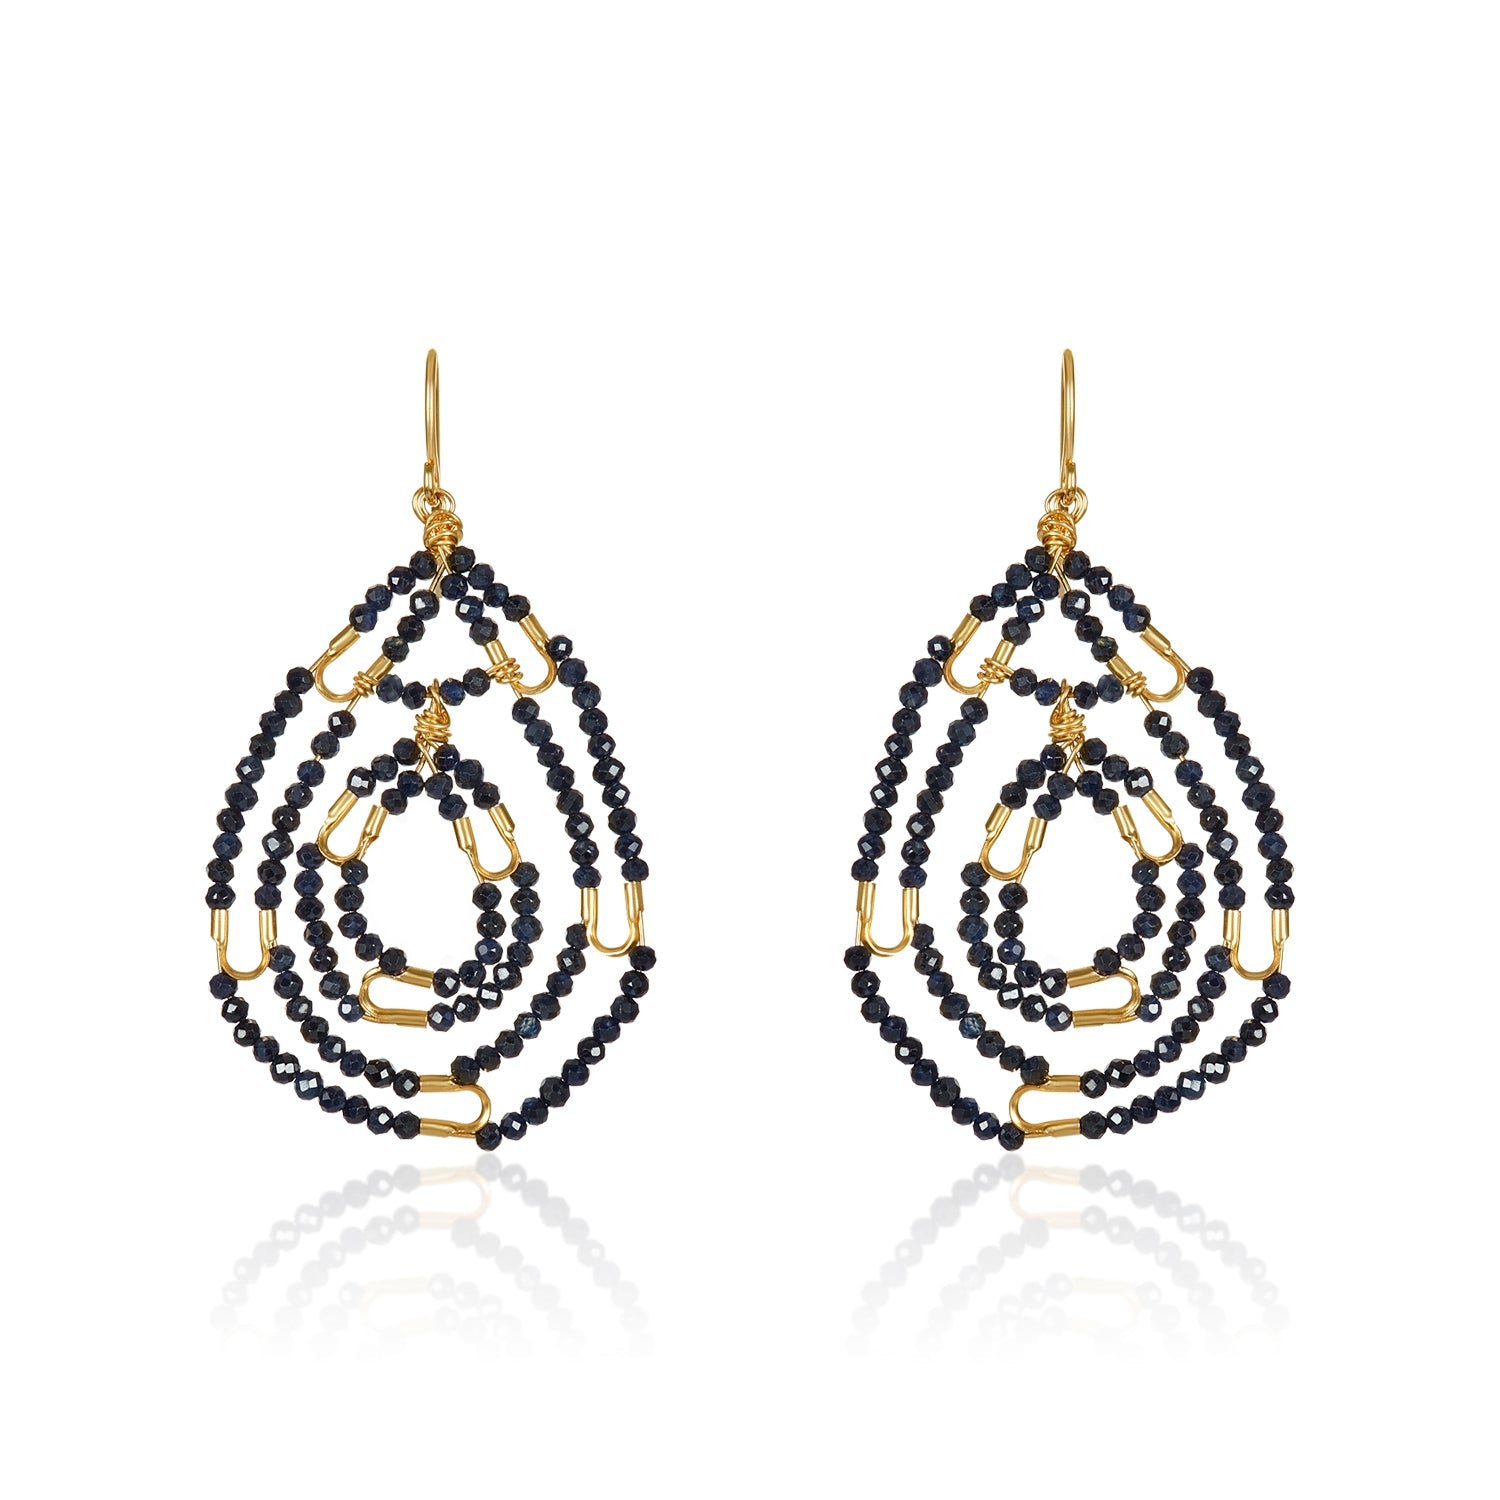 Cream and Sugar Earrings - Black spinel